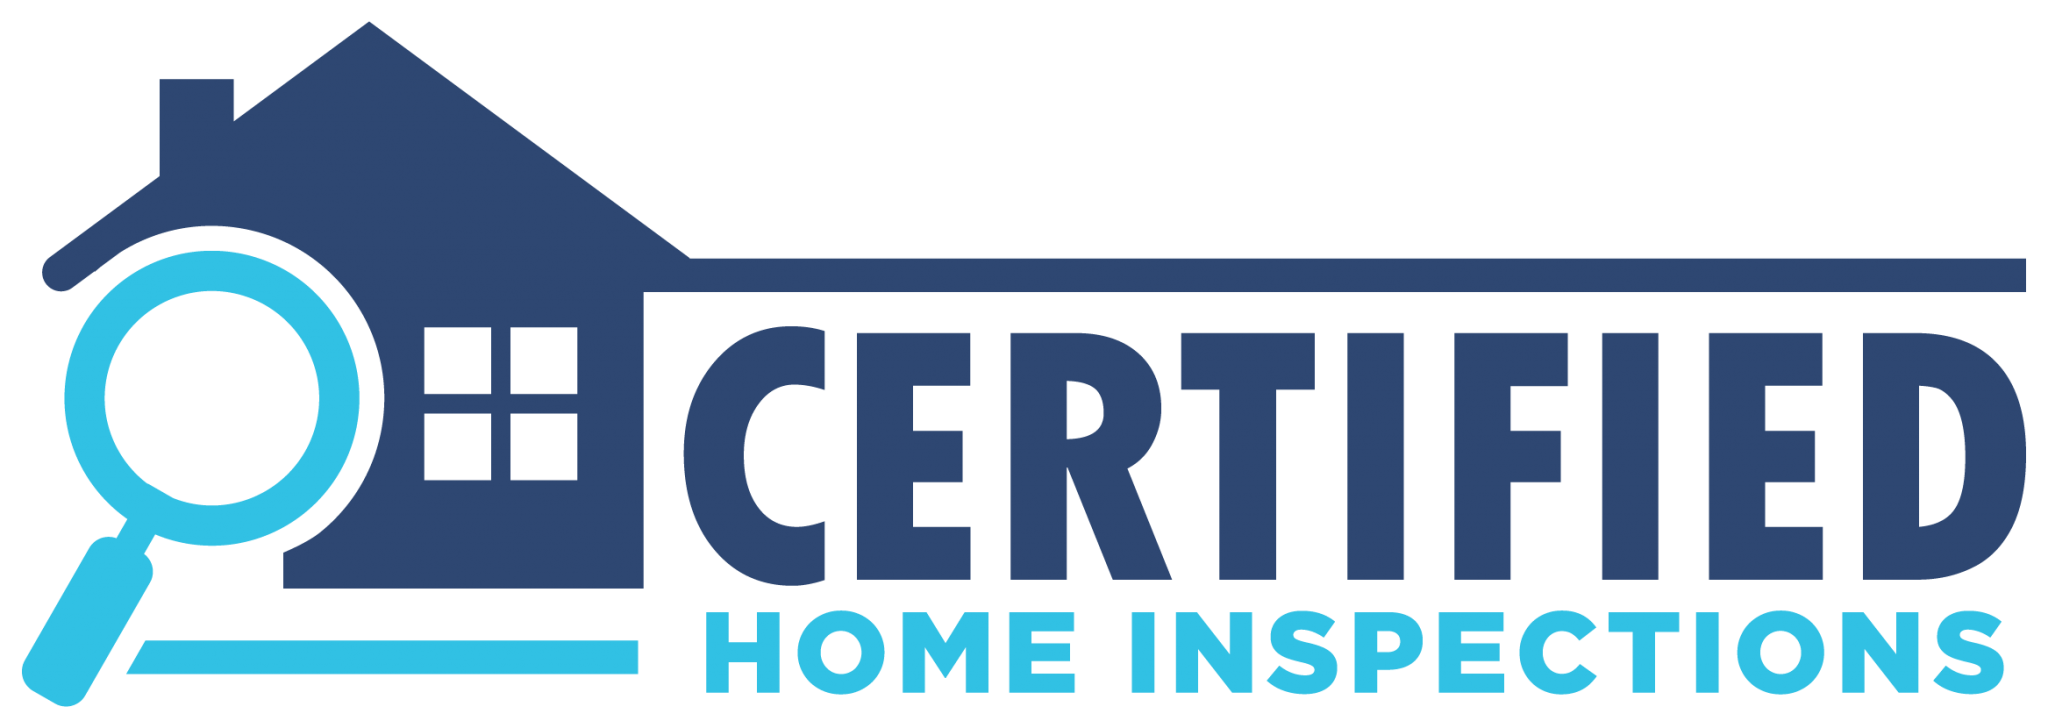 About certified Home inspections and services